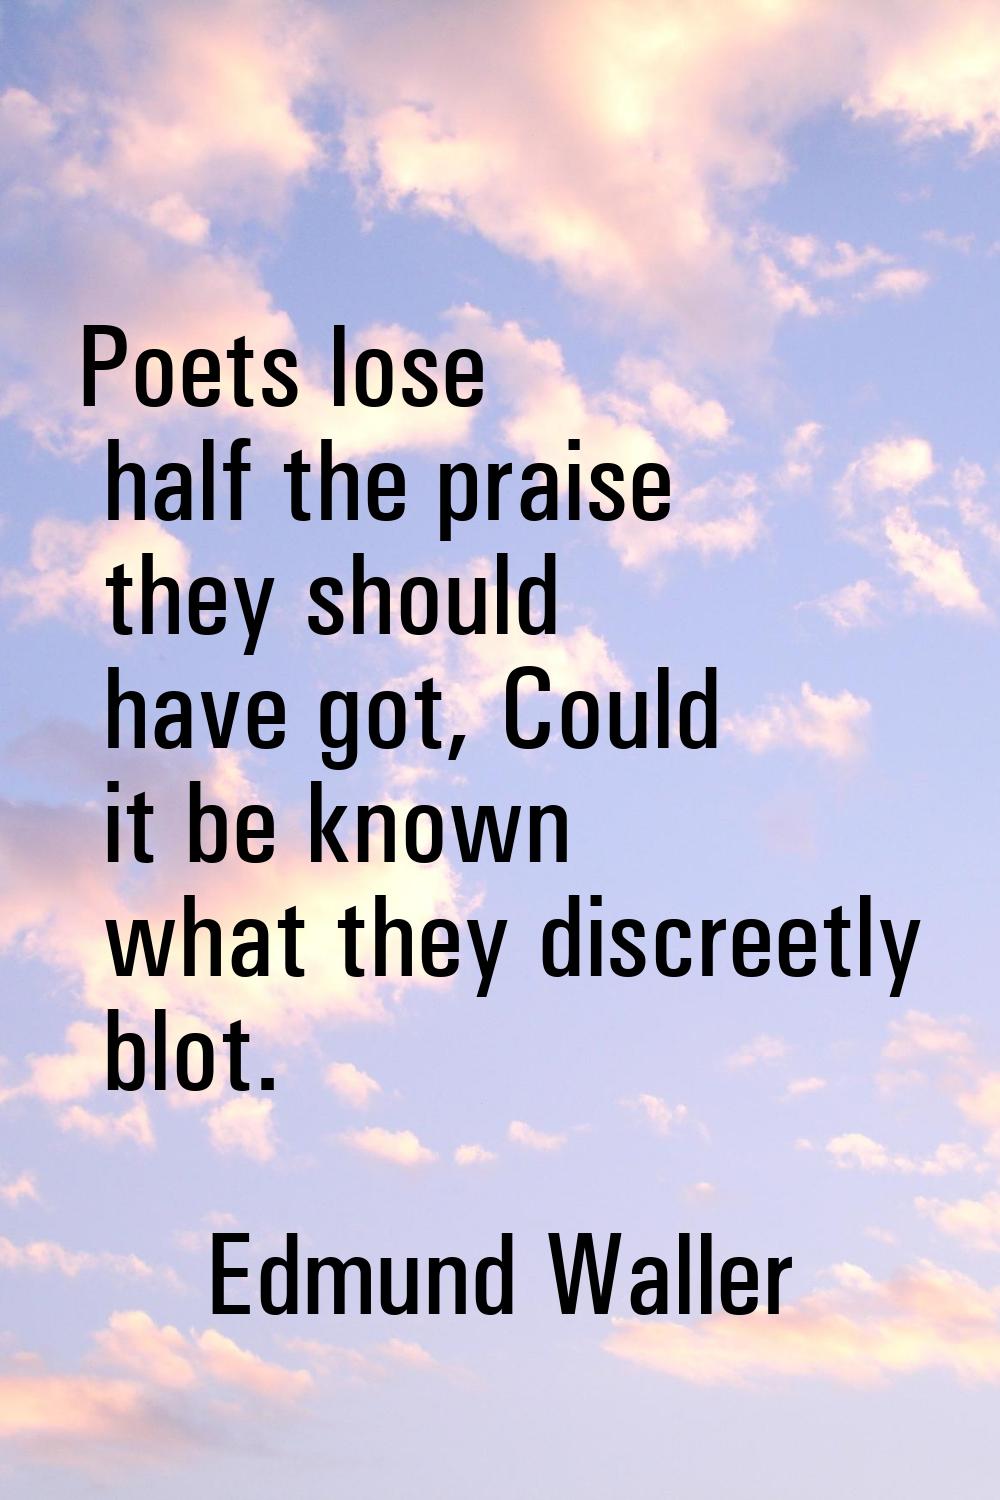 Poets lose half the praise they should have got, Could it be known what they discreetly blot.